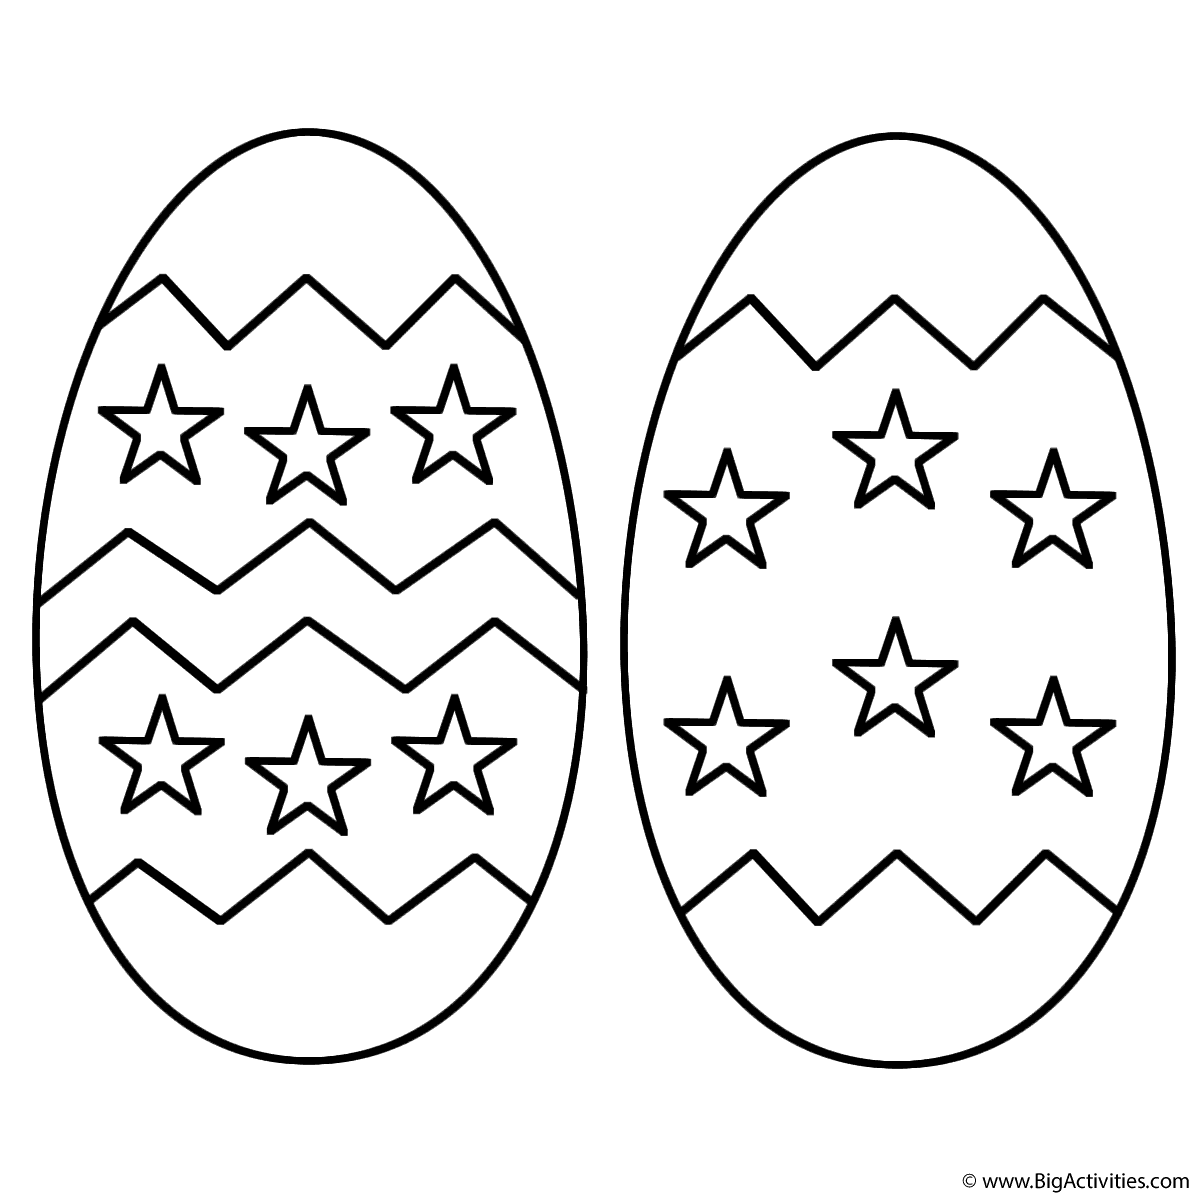 Two Easter Eggs with stars   Coloring Page Easter